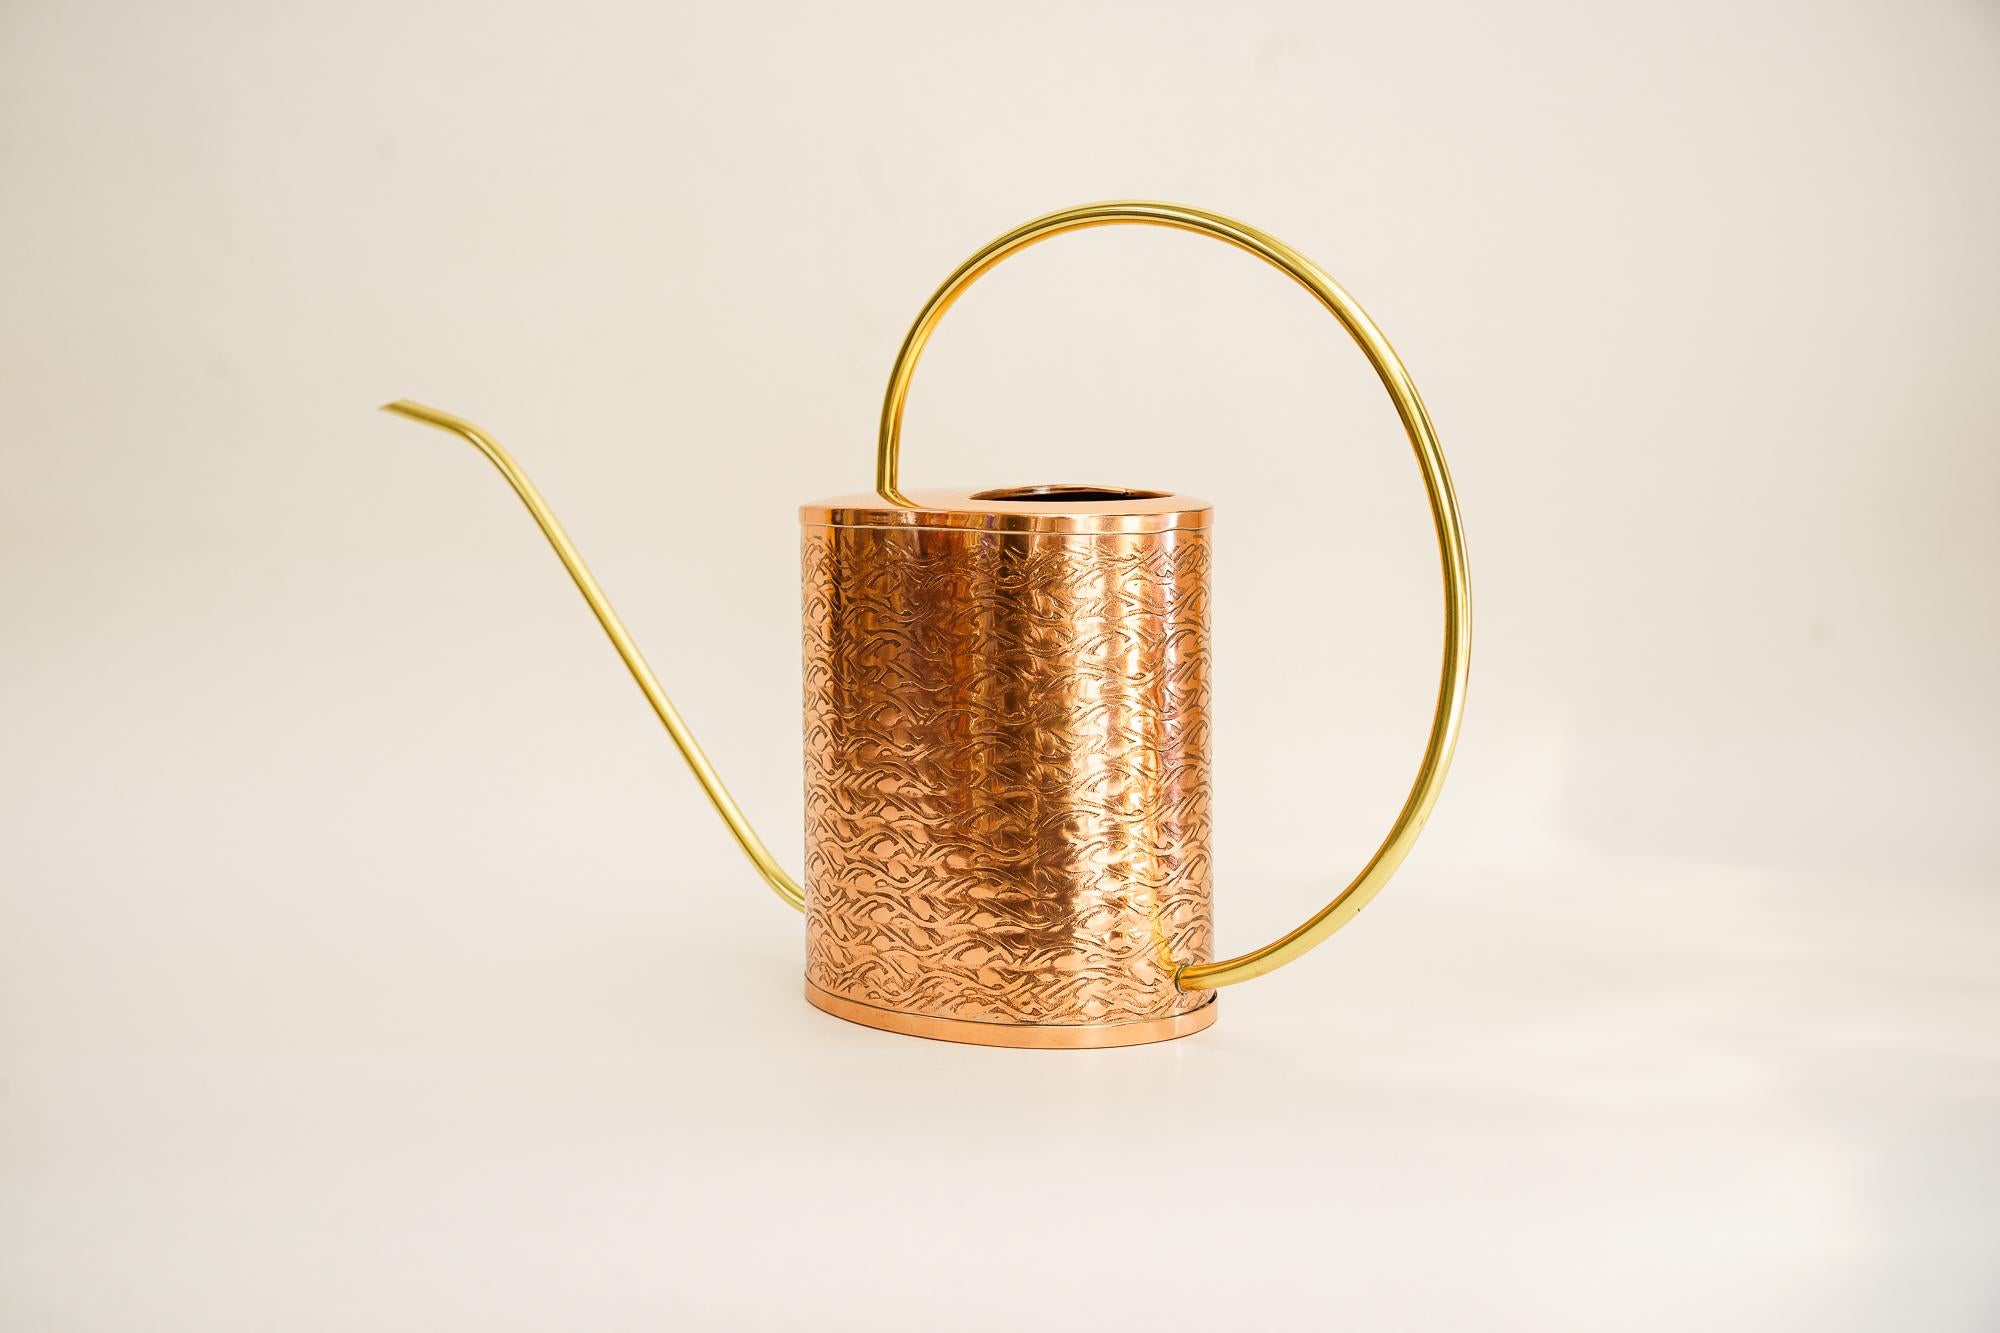 Copper and brass Watering Can, circa 1960s
Only Polished